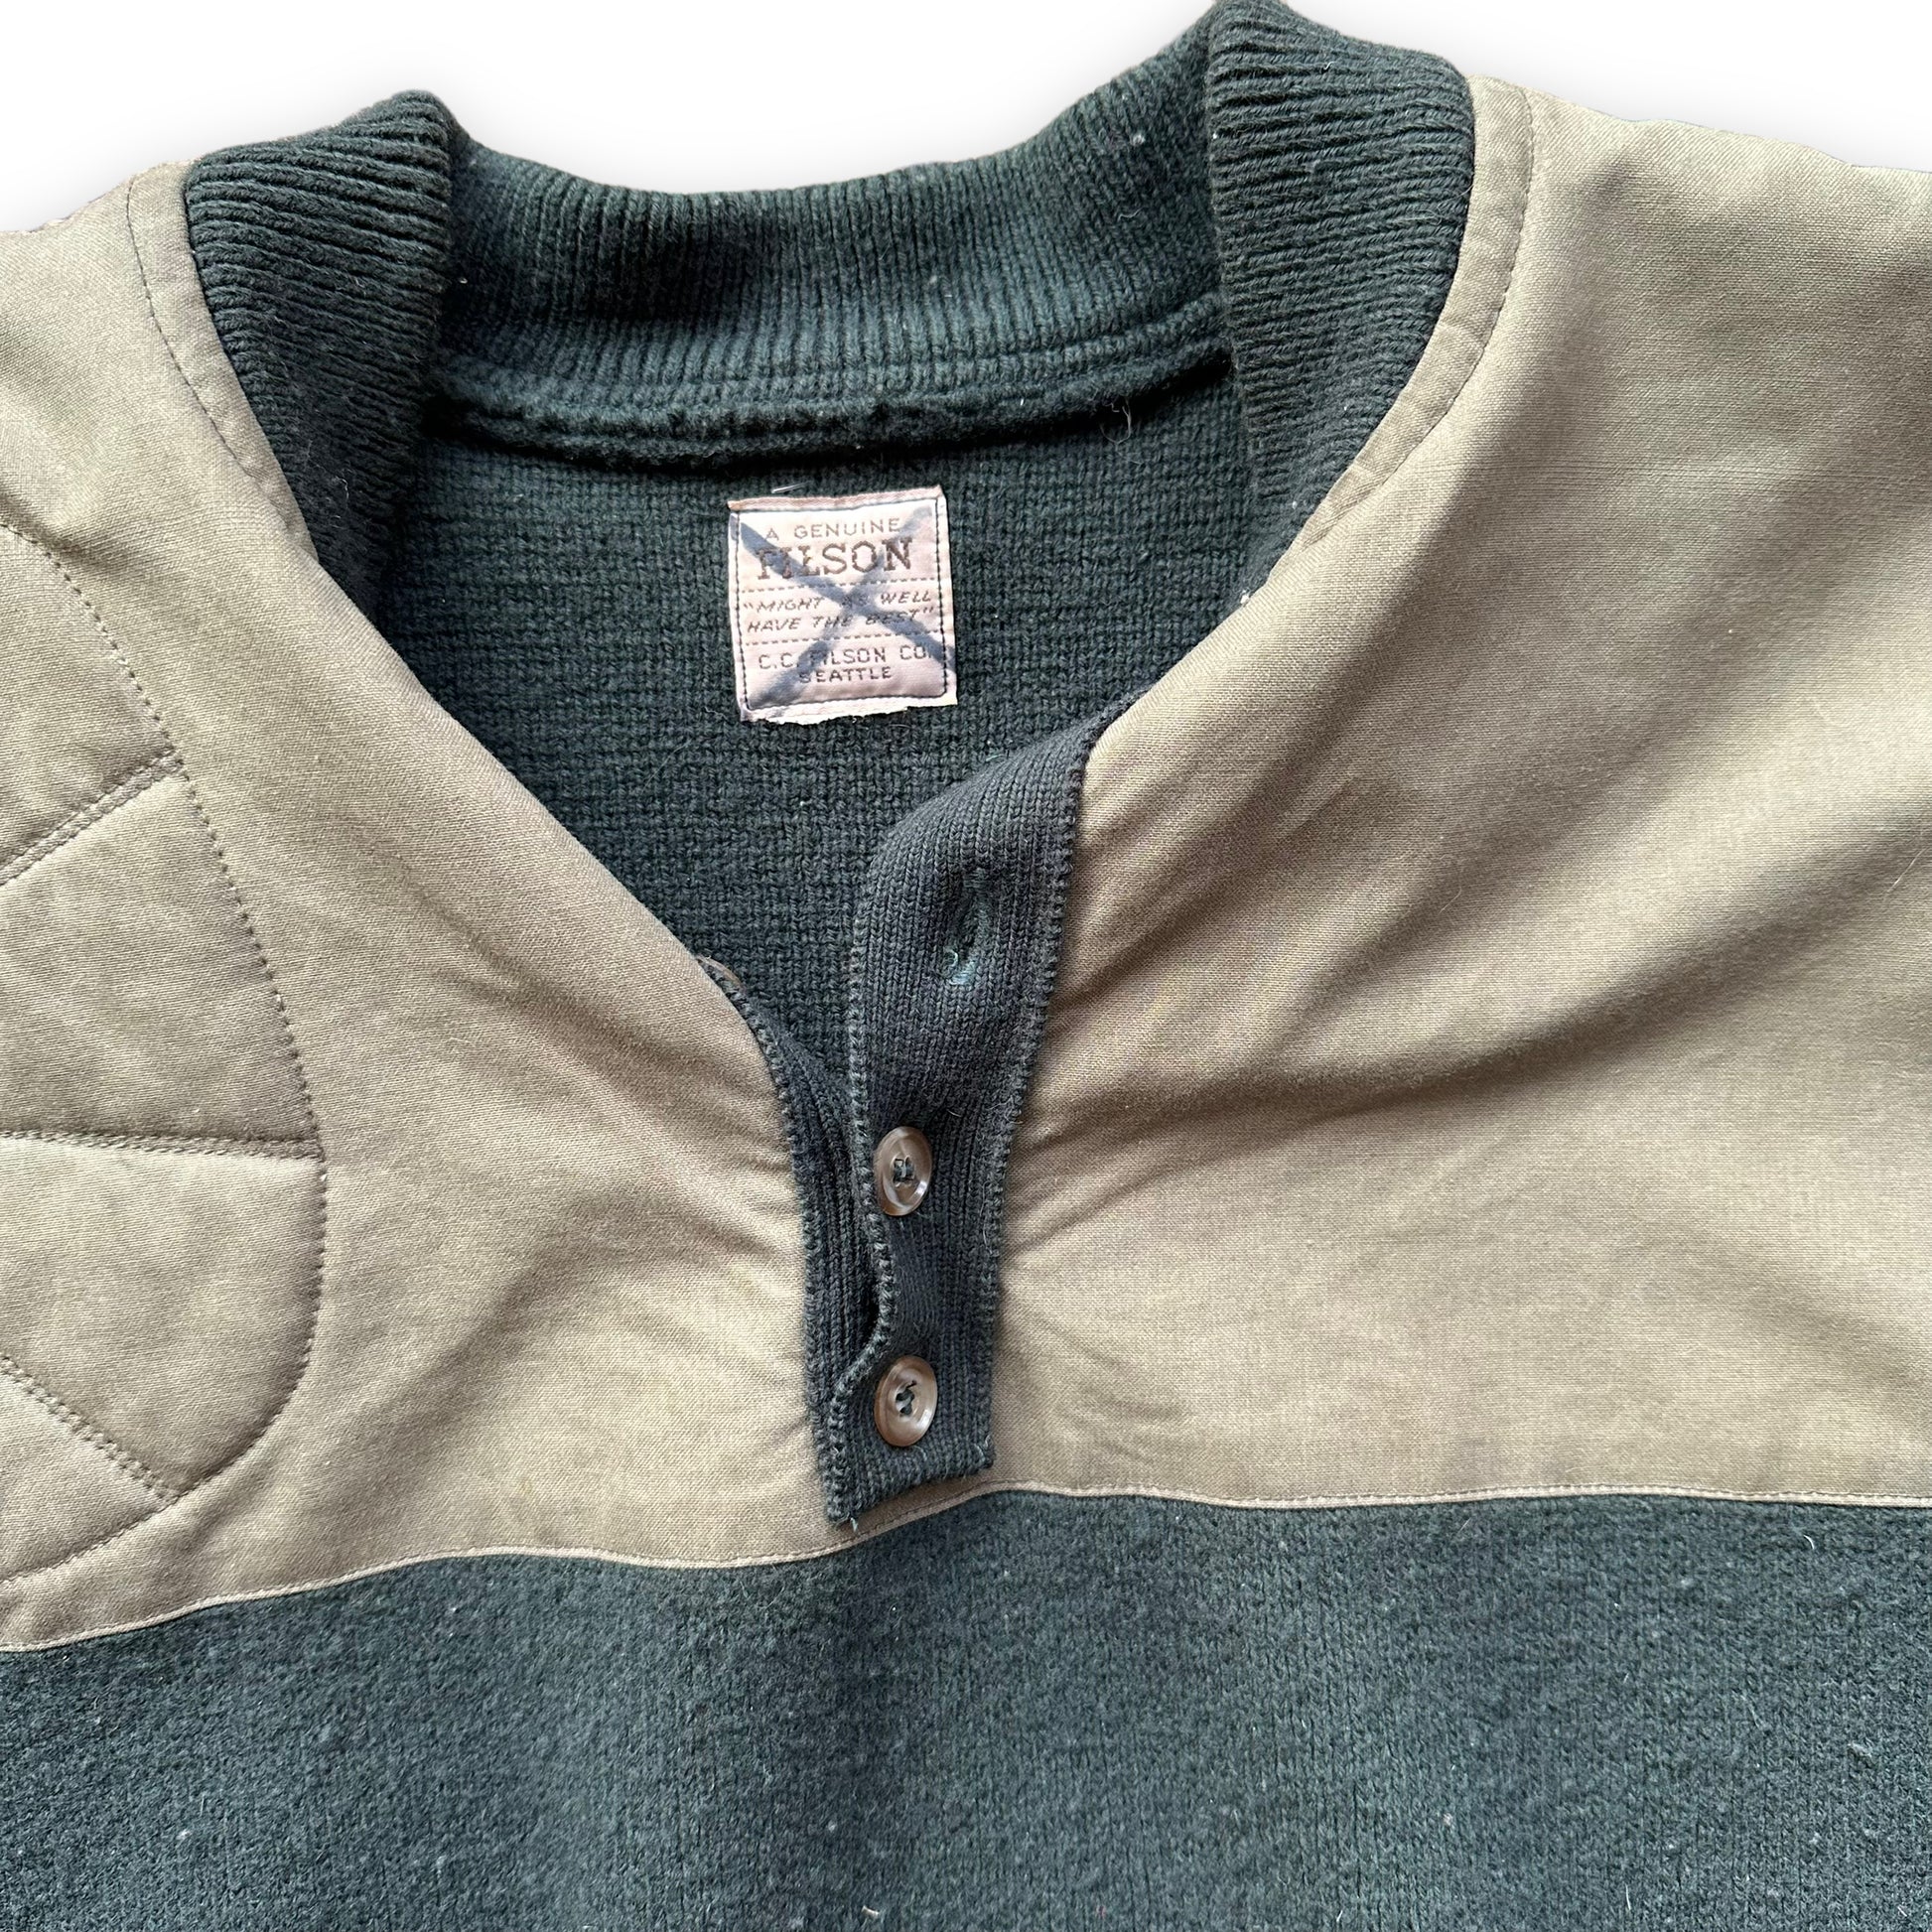 Tag View on Filson Guide Sweater SZ XL |  Barn Owl Vintage Goods | Vintage Filson Workwear Seattle